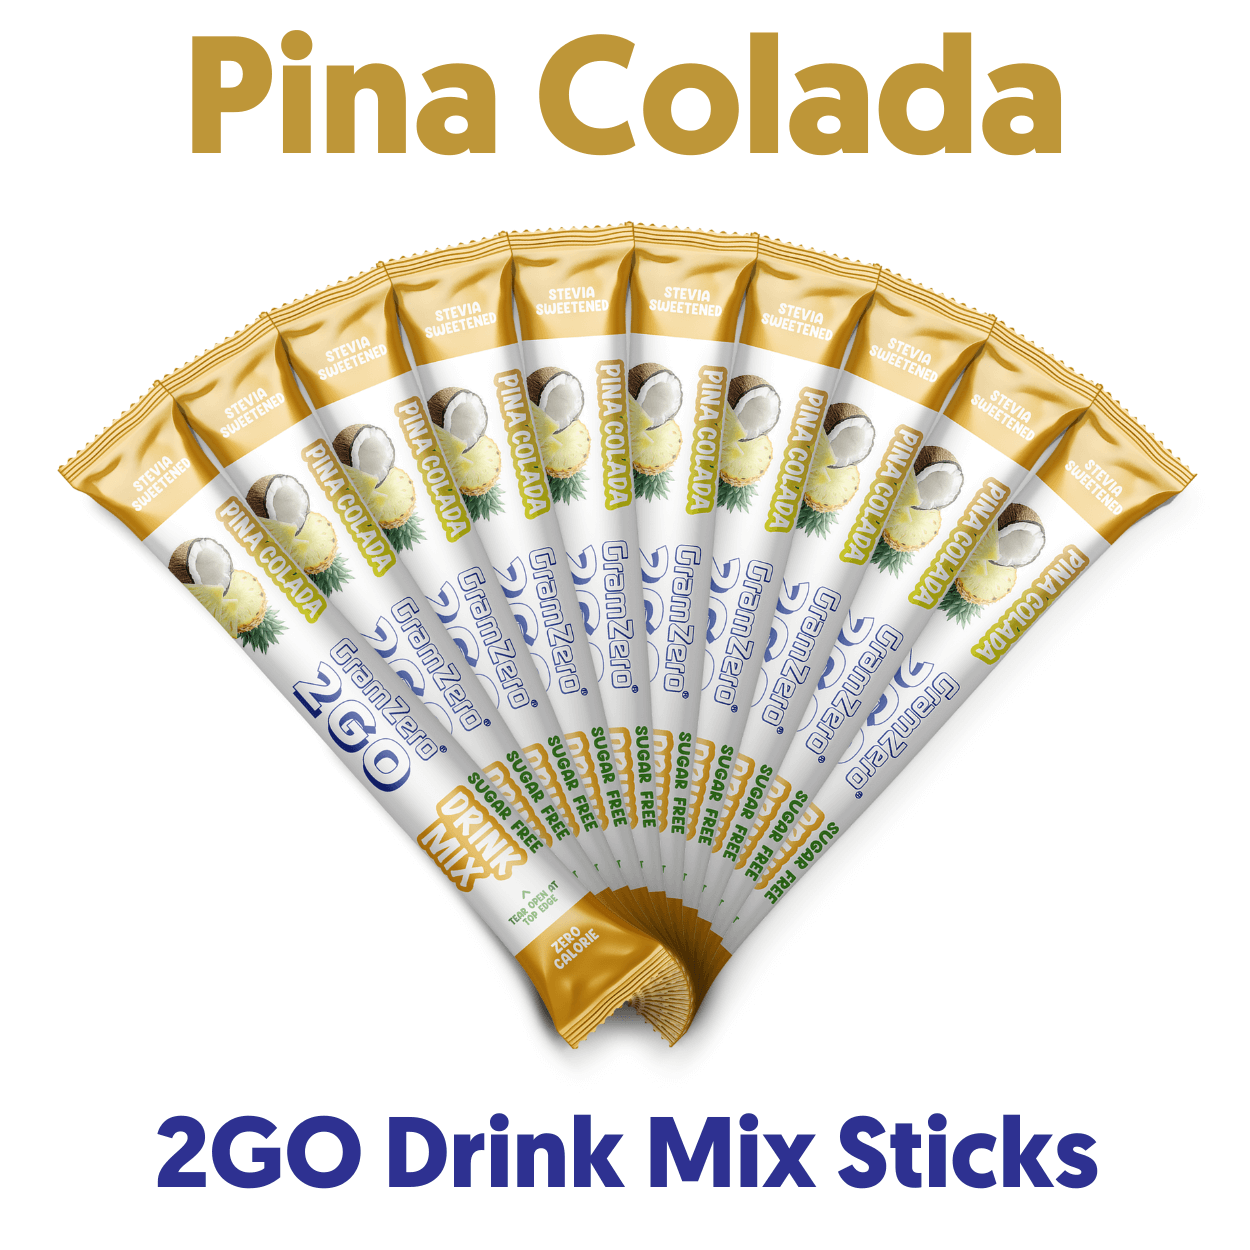 PINA COLADA 2GO Sugar Free Drink Mix Sticks: 10 Pack ~ Great for Loaded Tea Kits